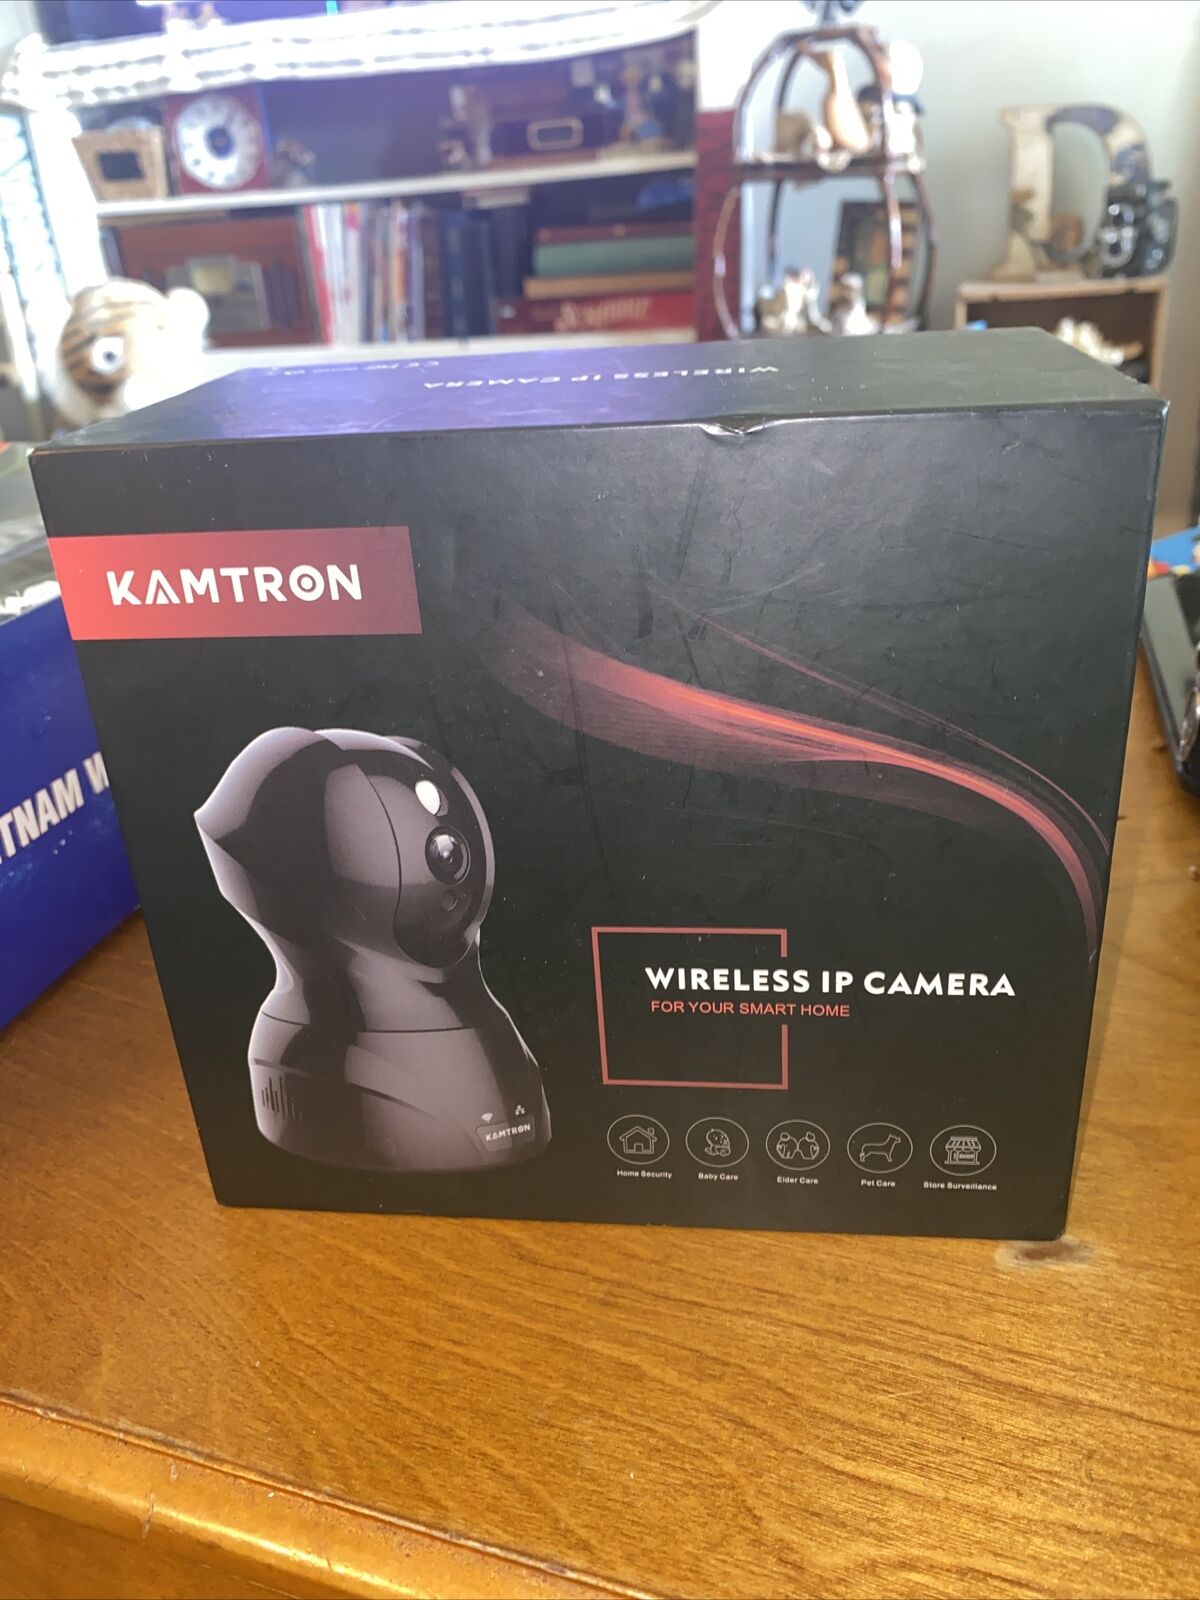 Kamtron Wireless IP Camera 826 Black Can Be Used With Smart Phone.